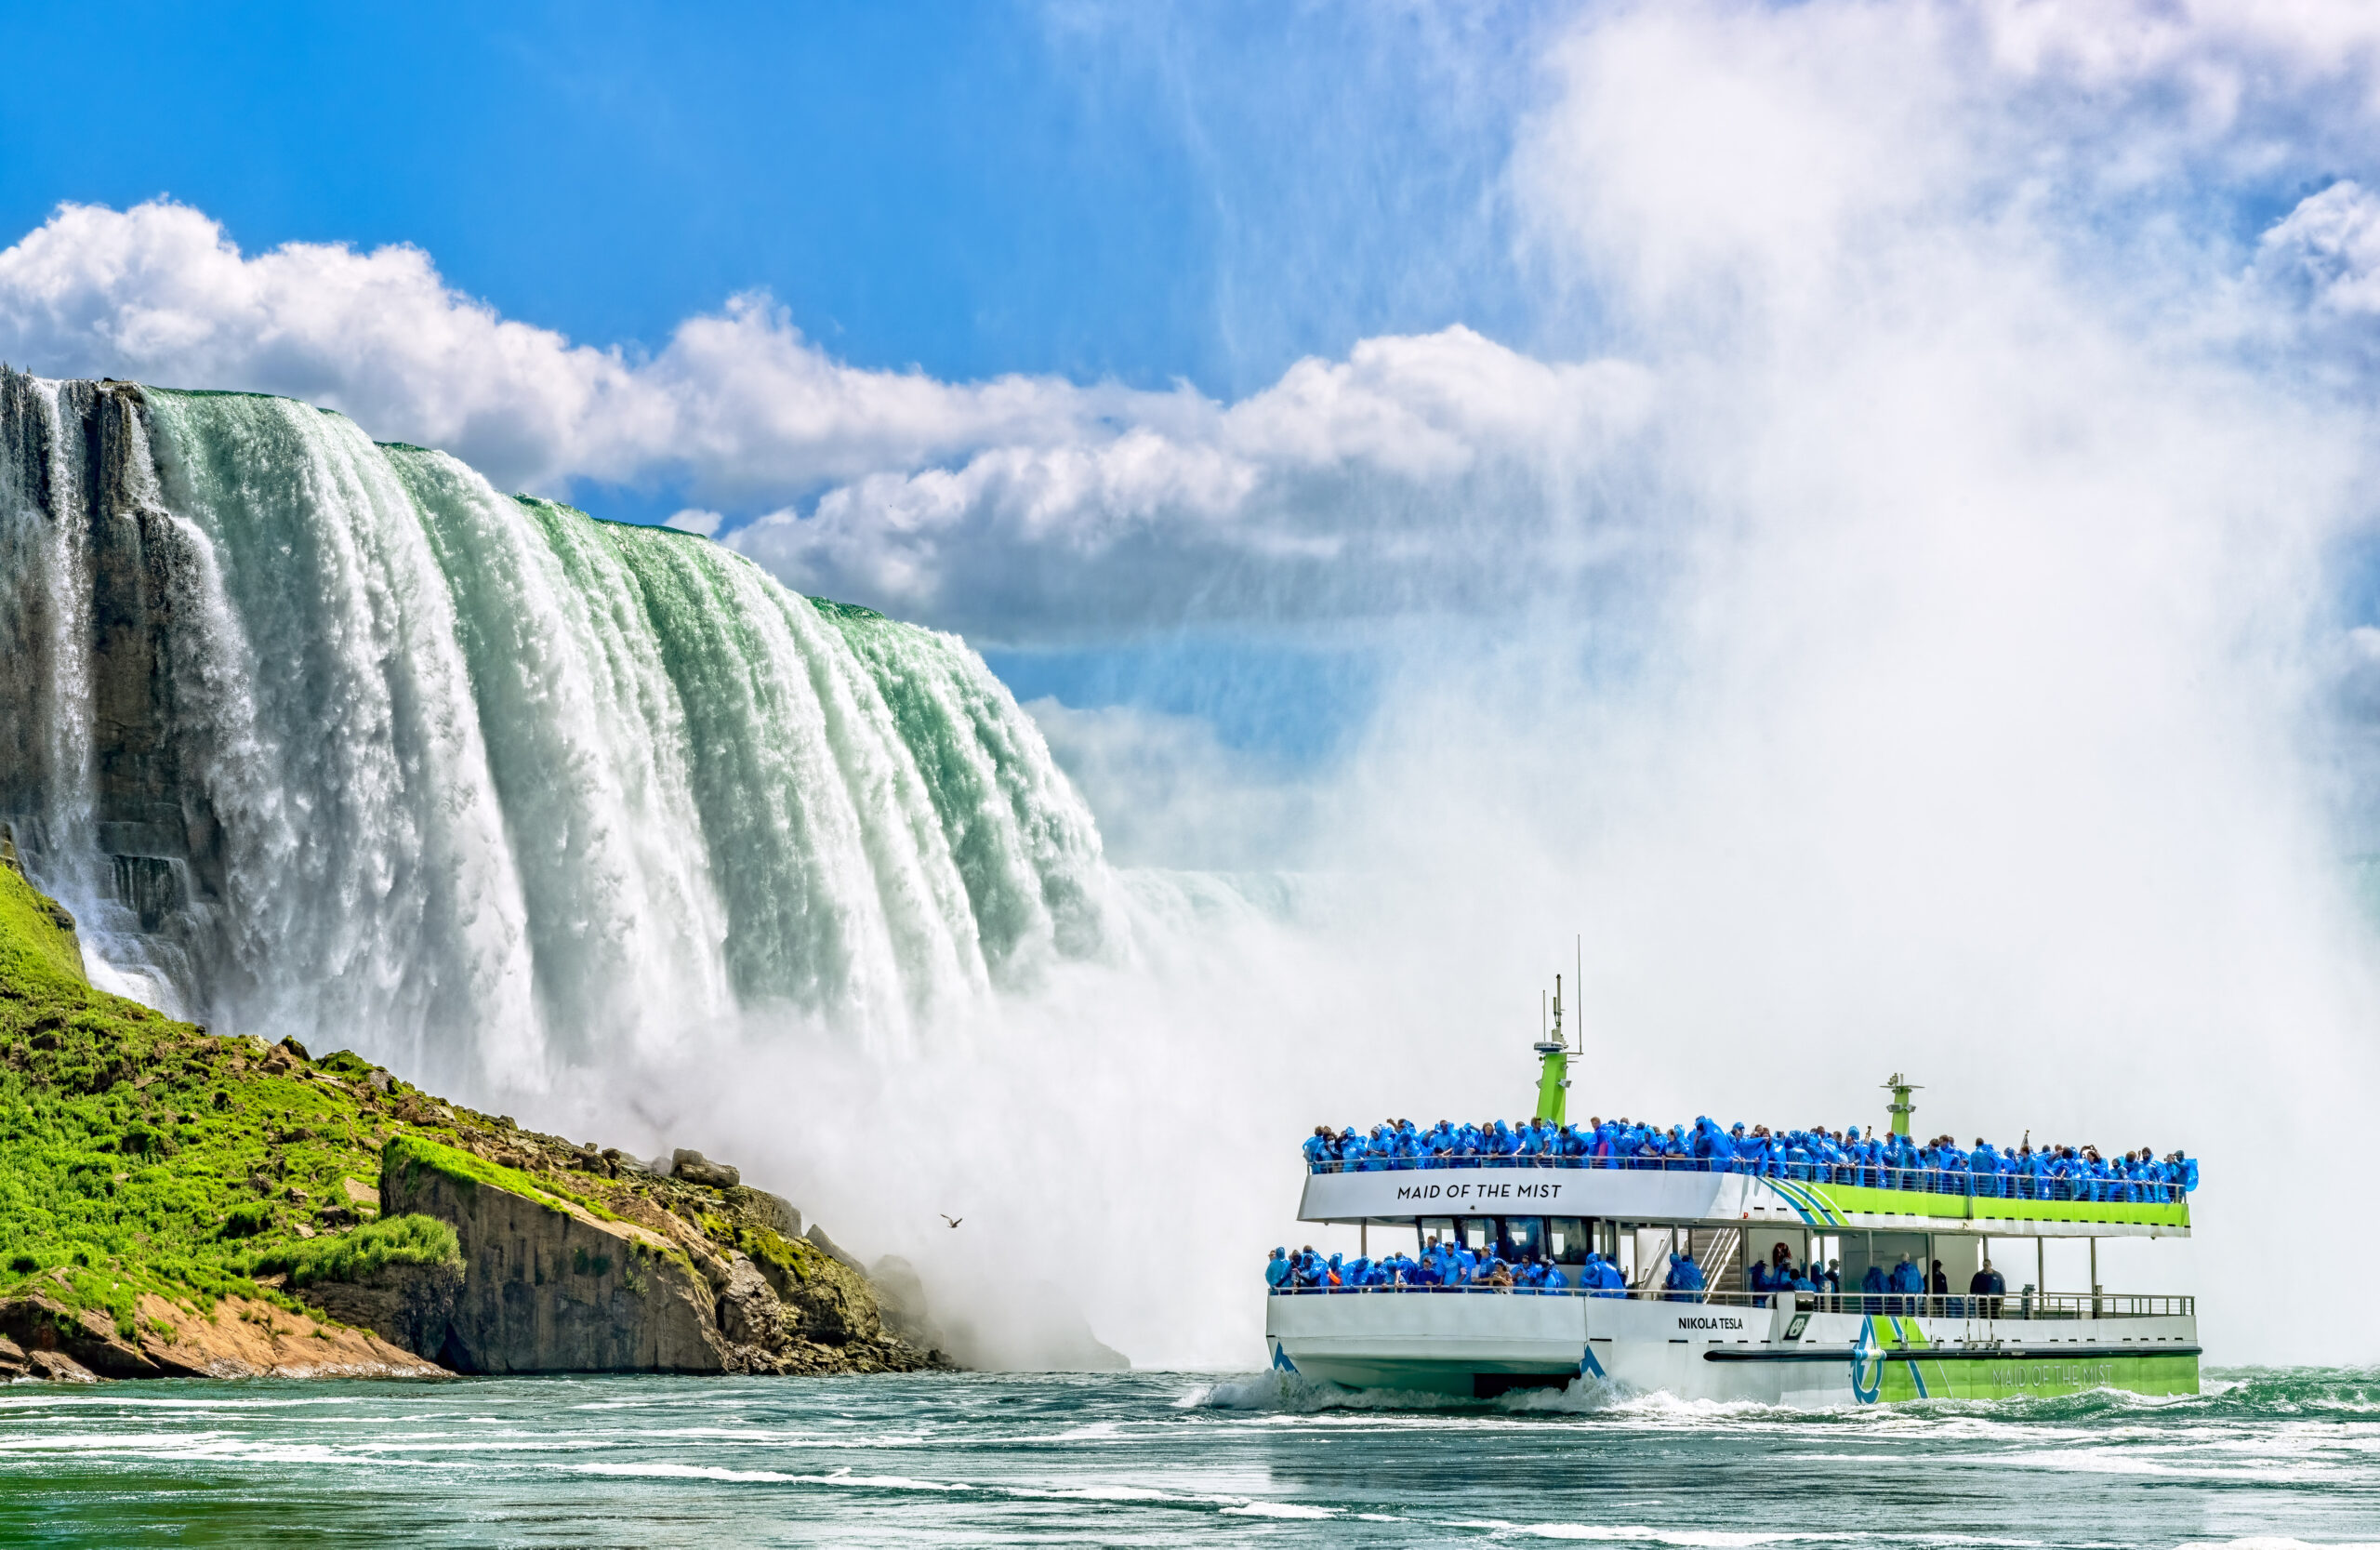 http://Maid-of-the-MIst-1